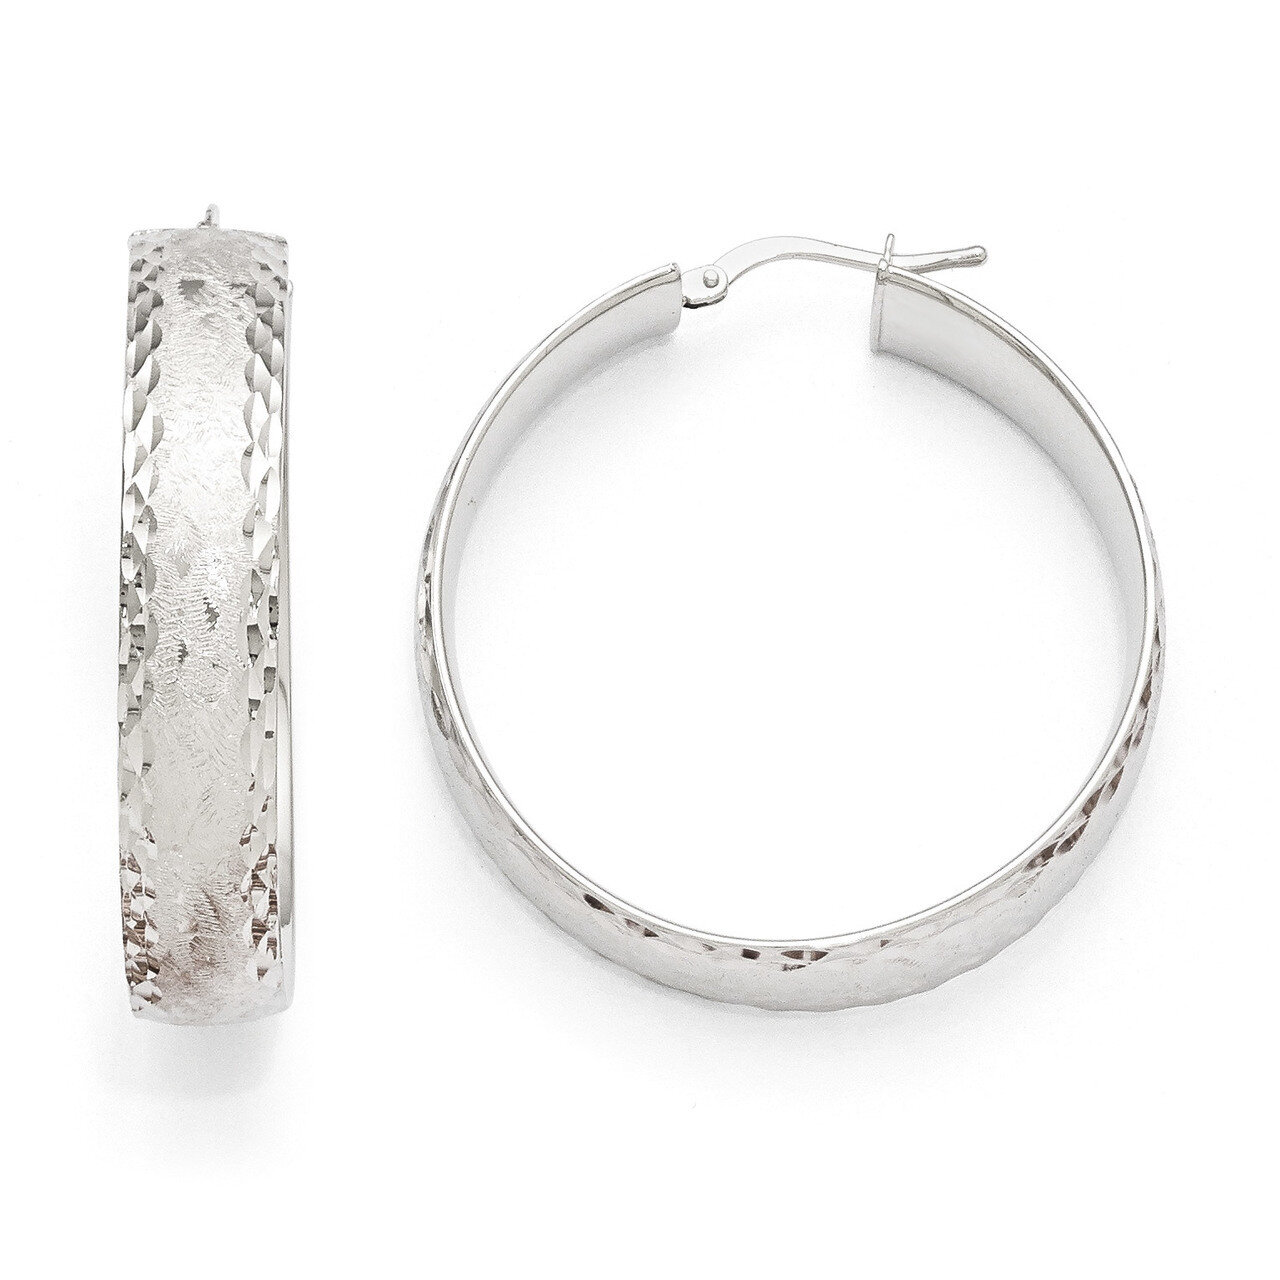 Diego Massimo Etched Rhodium-plated Hoop Earrings Bronze DME136